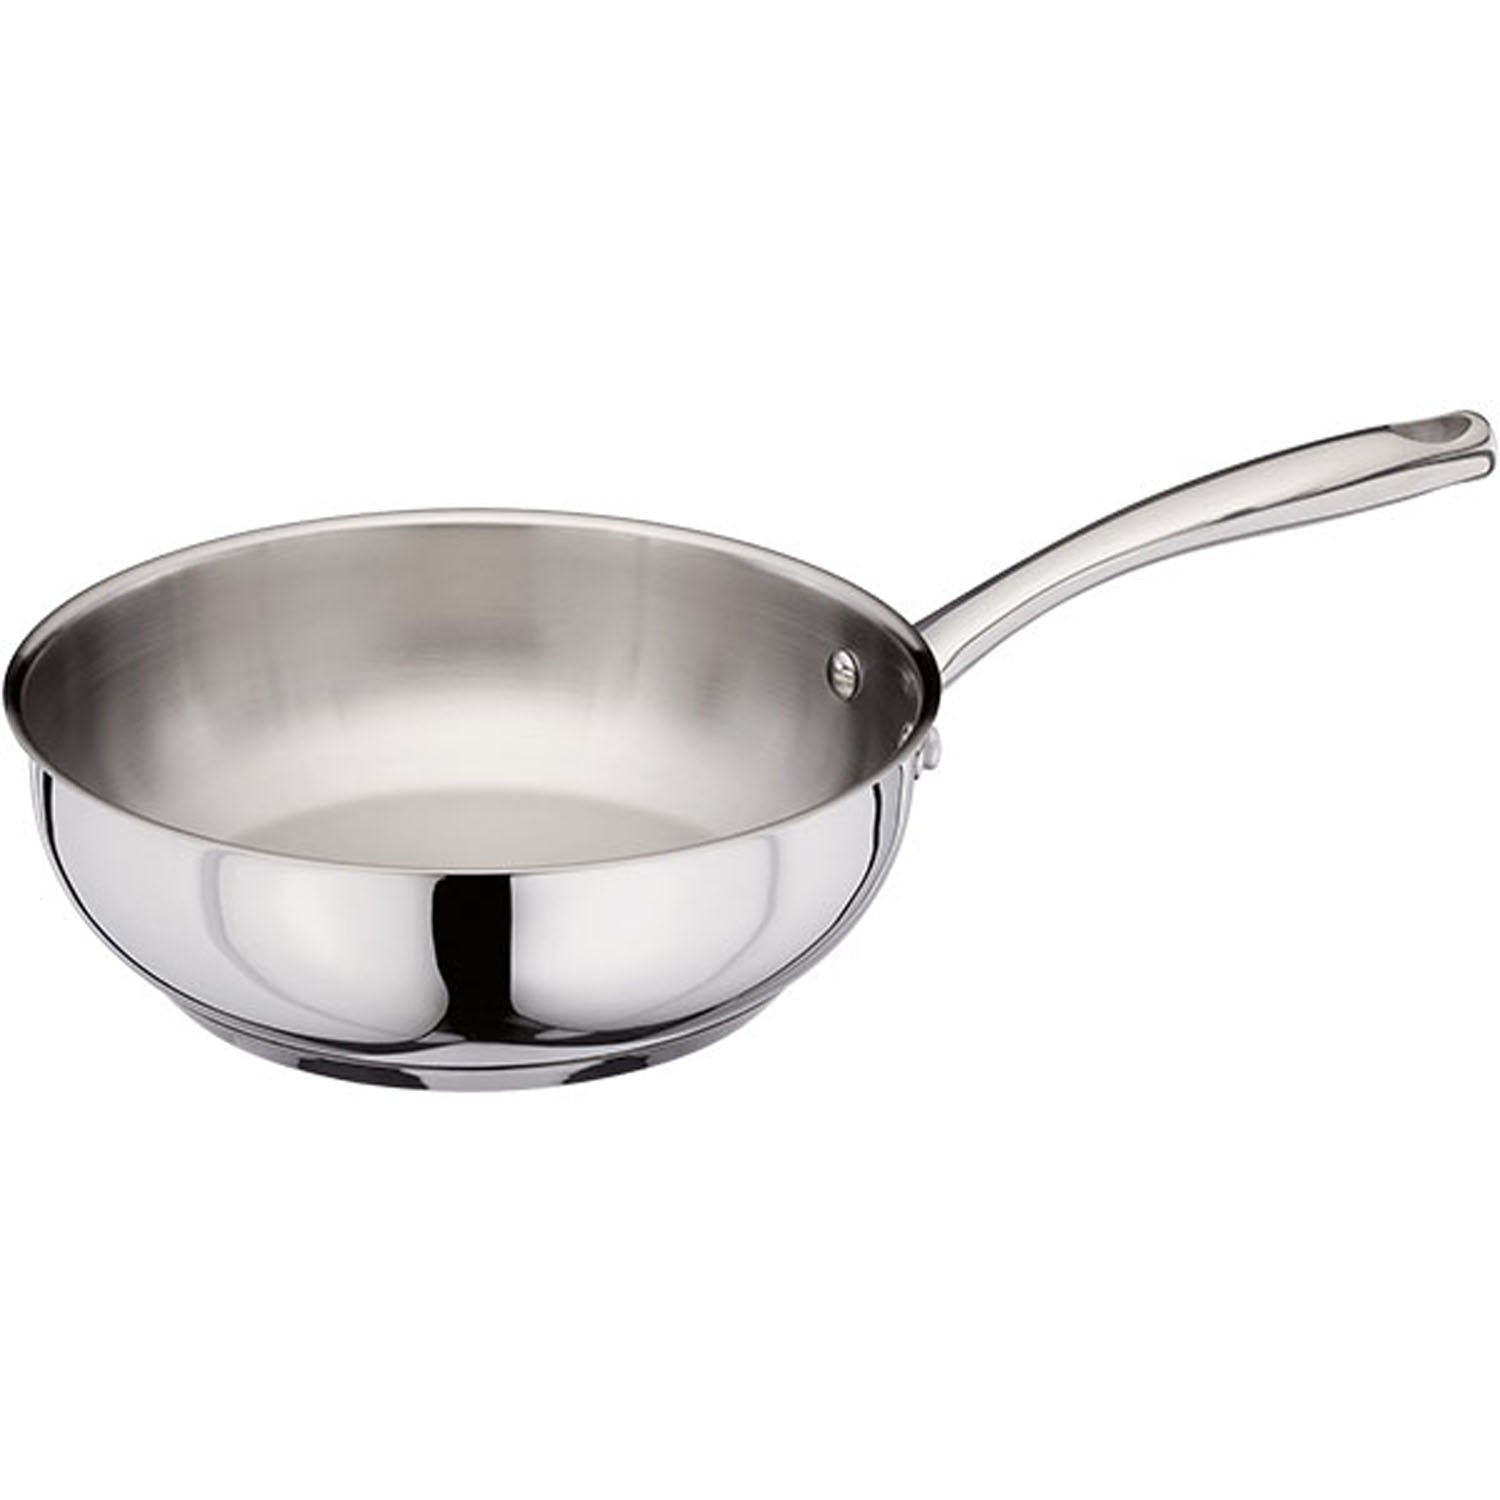 Tower Speciality Cookware 24cm Chefs Pan 2 Shaws Department Stores